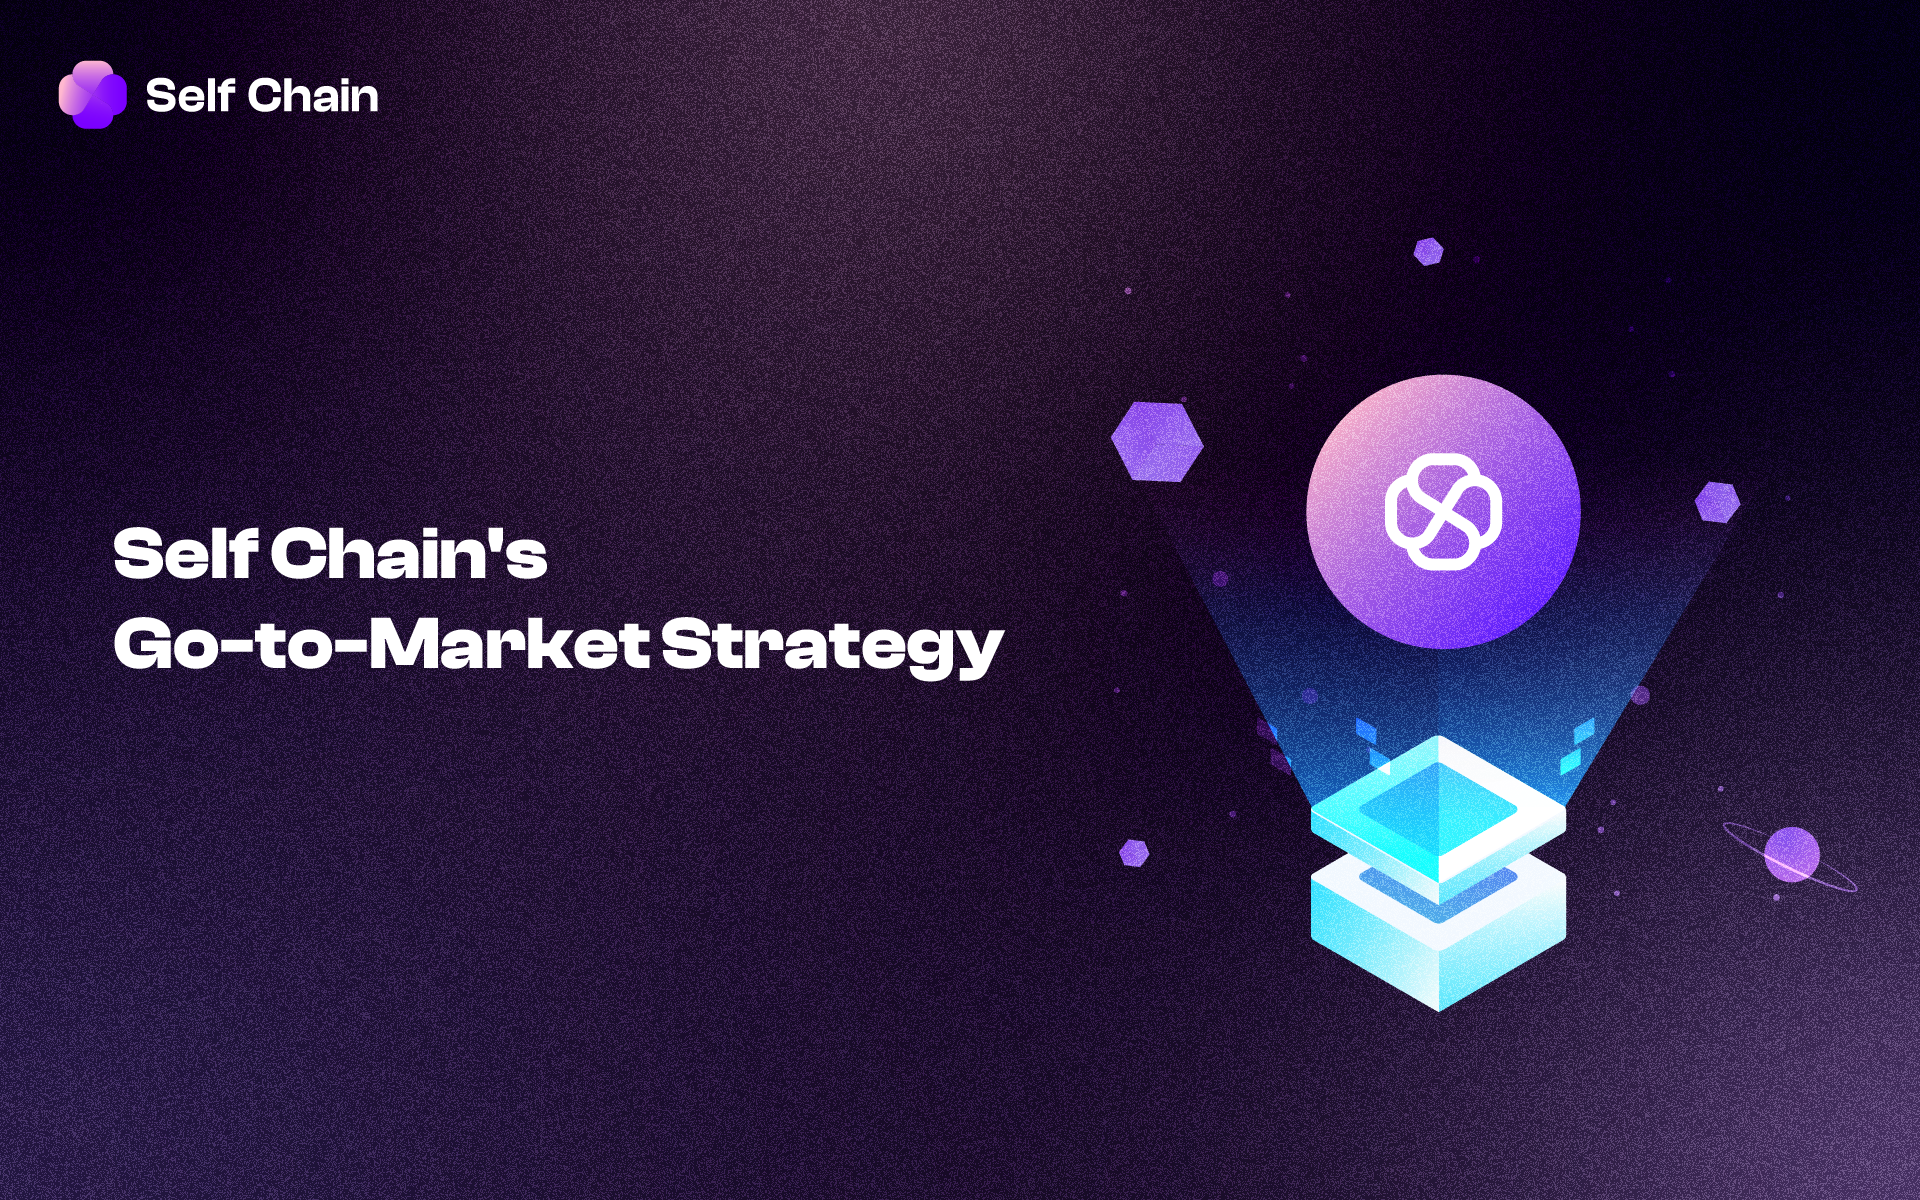 Self Chain's Go-to-Market Strategy